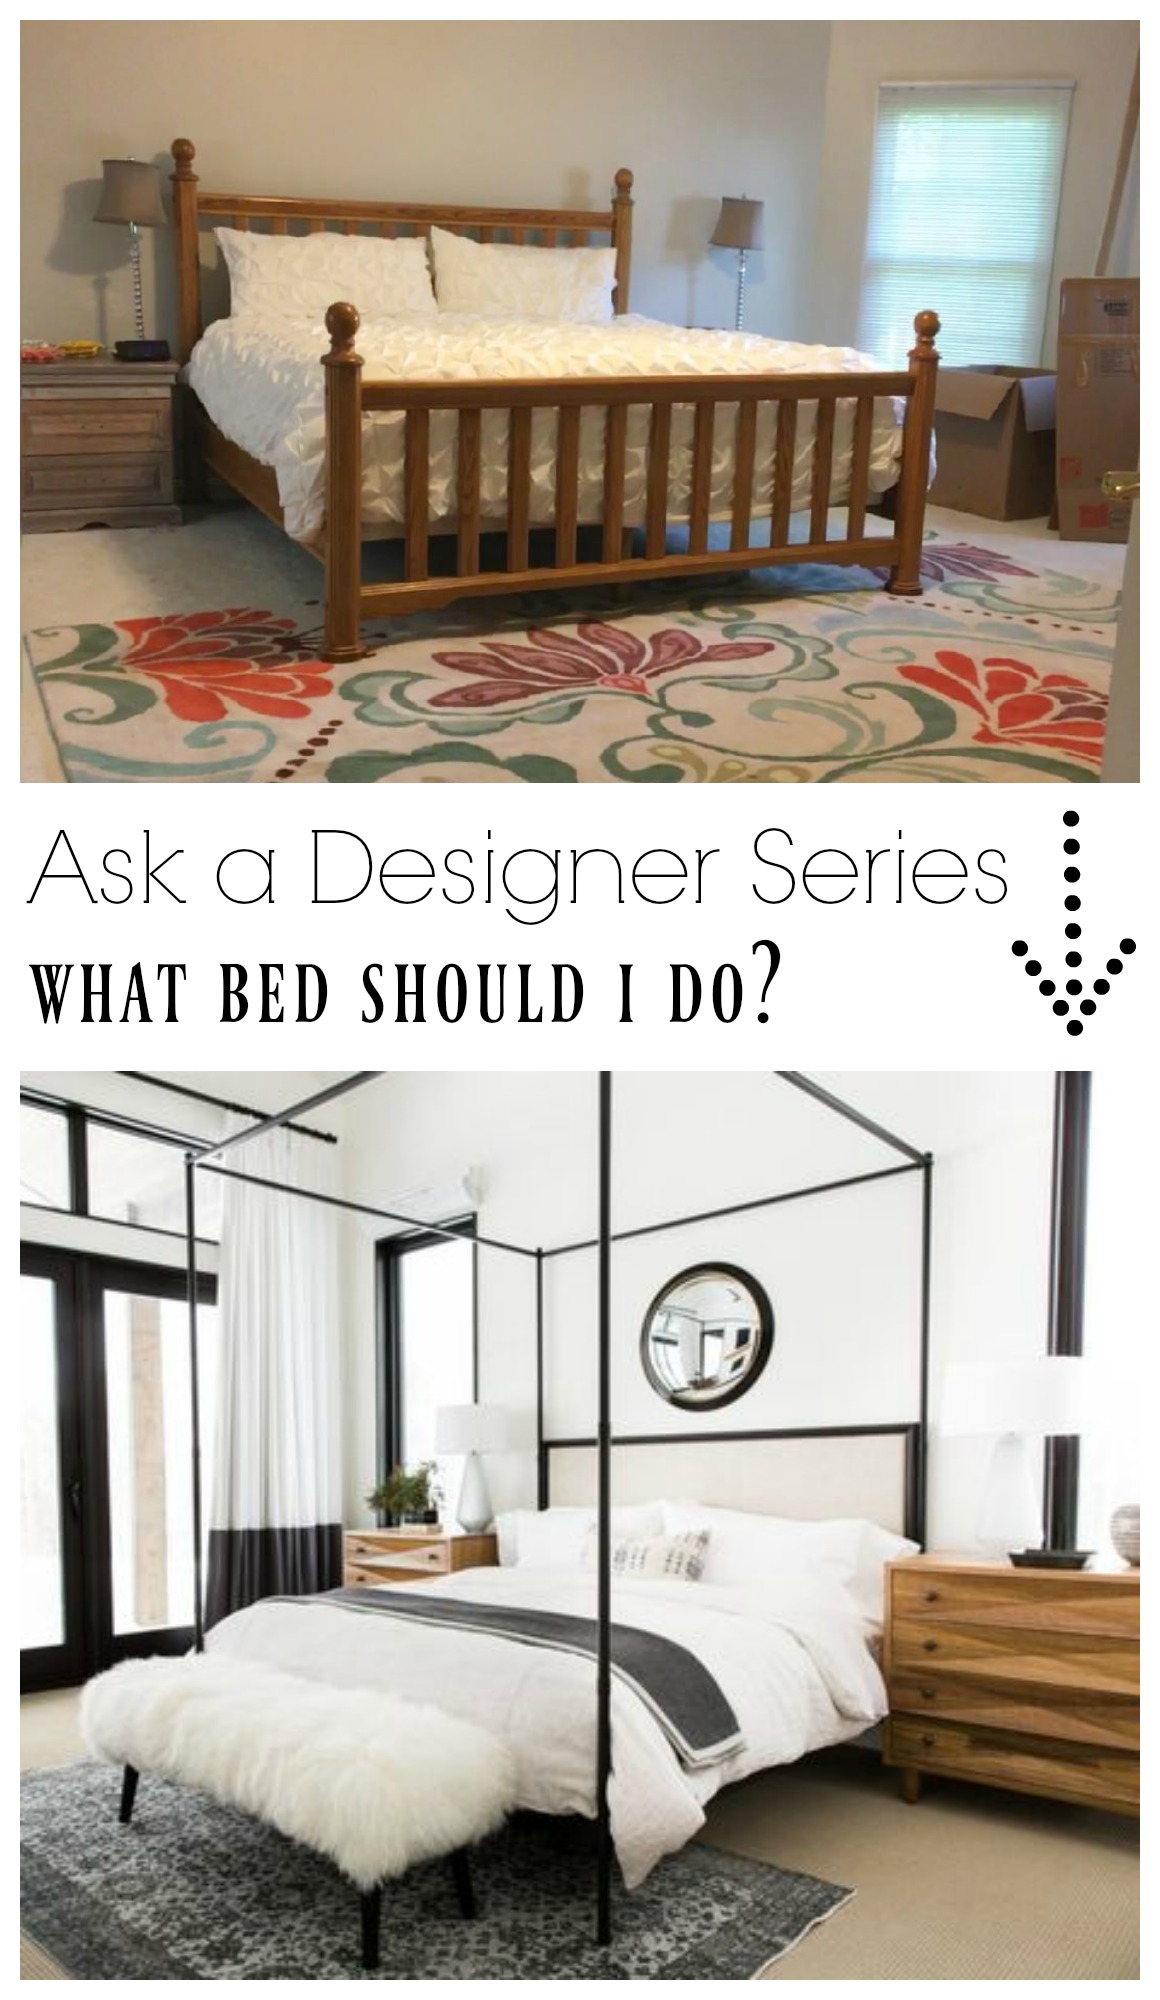 Ask a Desinger Series- What bed should I do in our master bedroom?